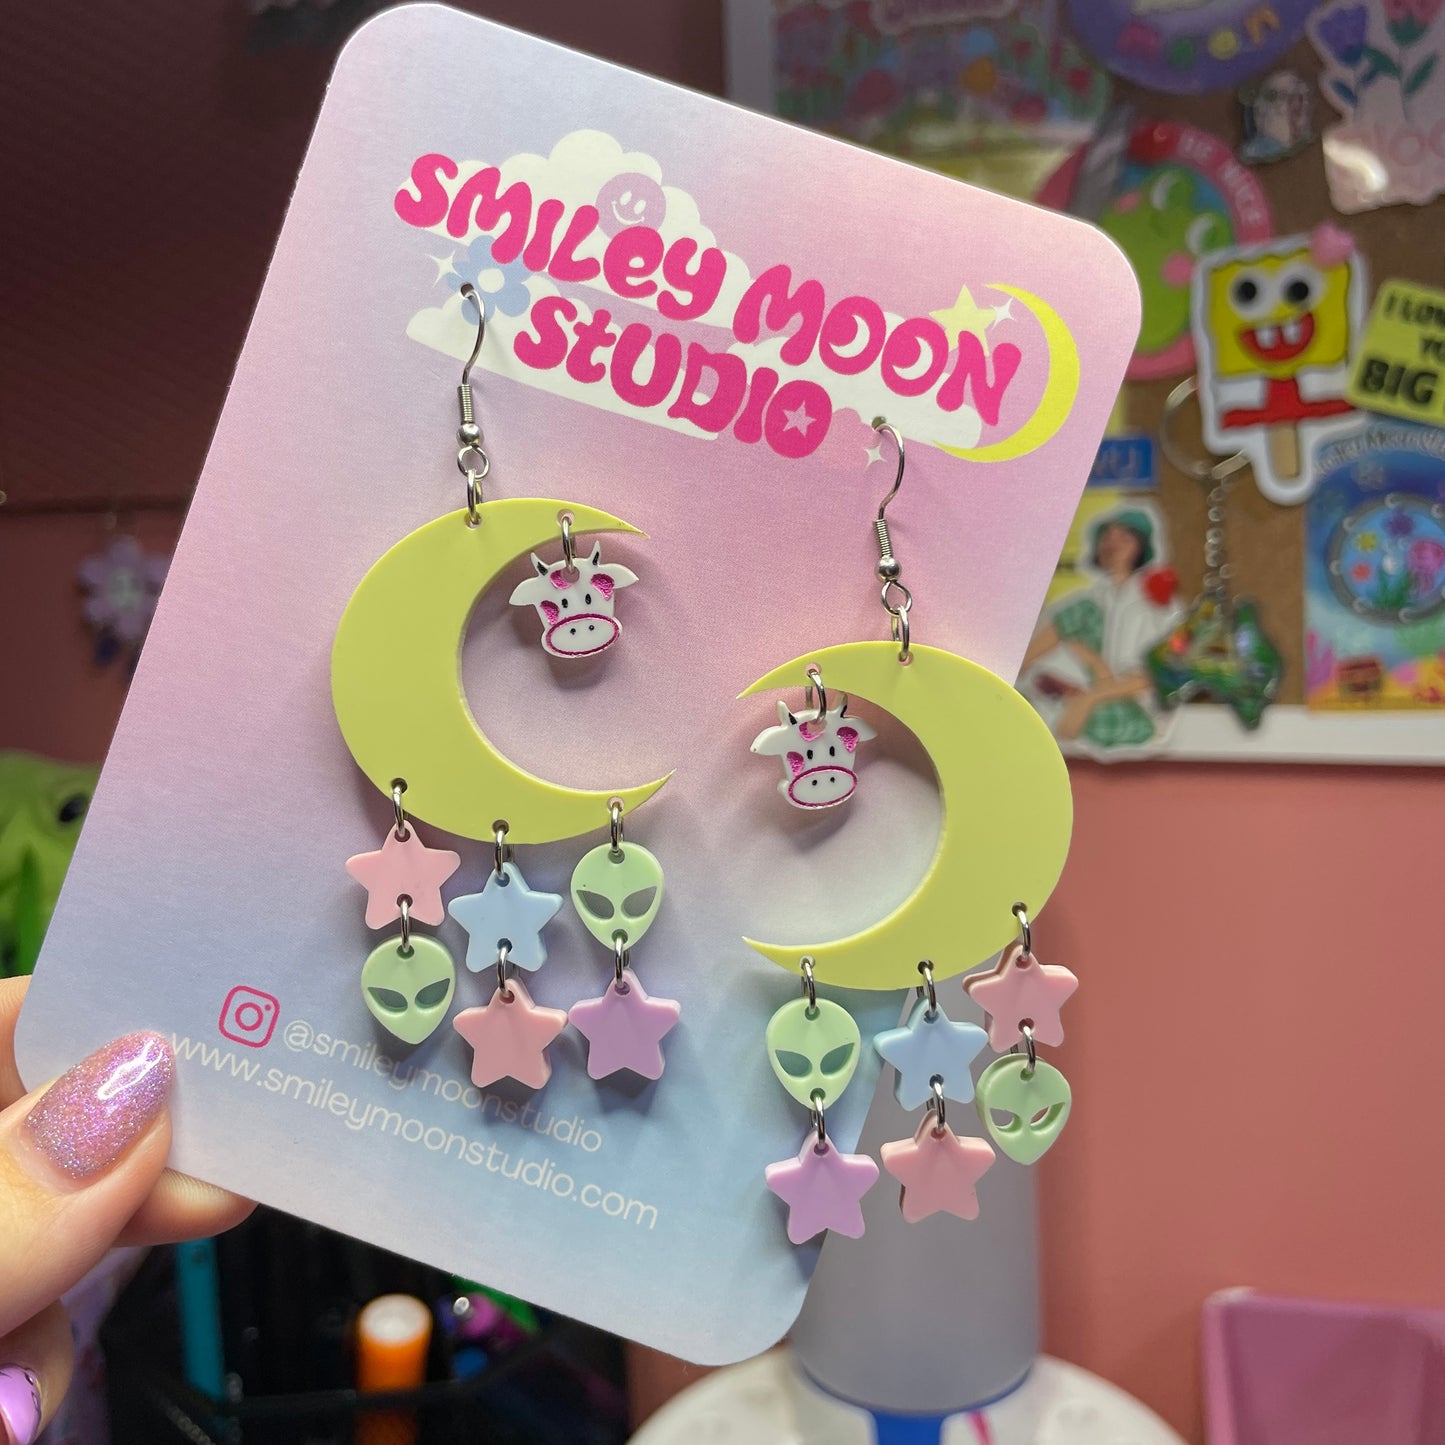 Cow Jumped Over the Pastel Moon Acrylic Earrings